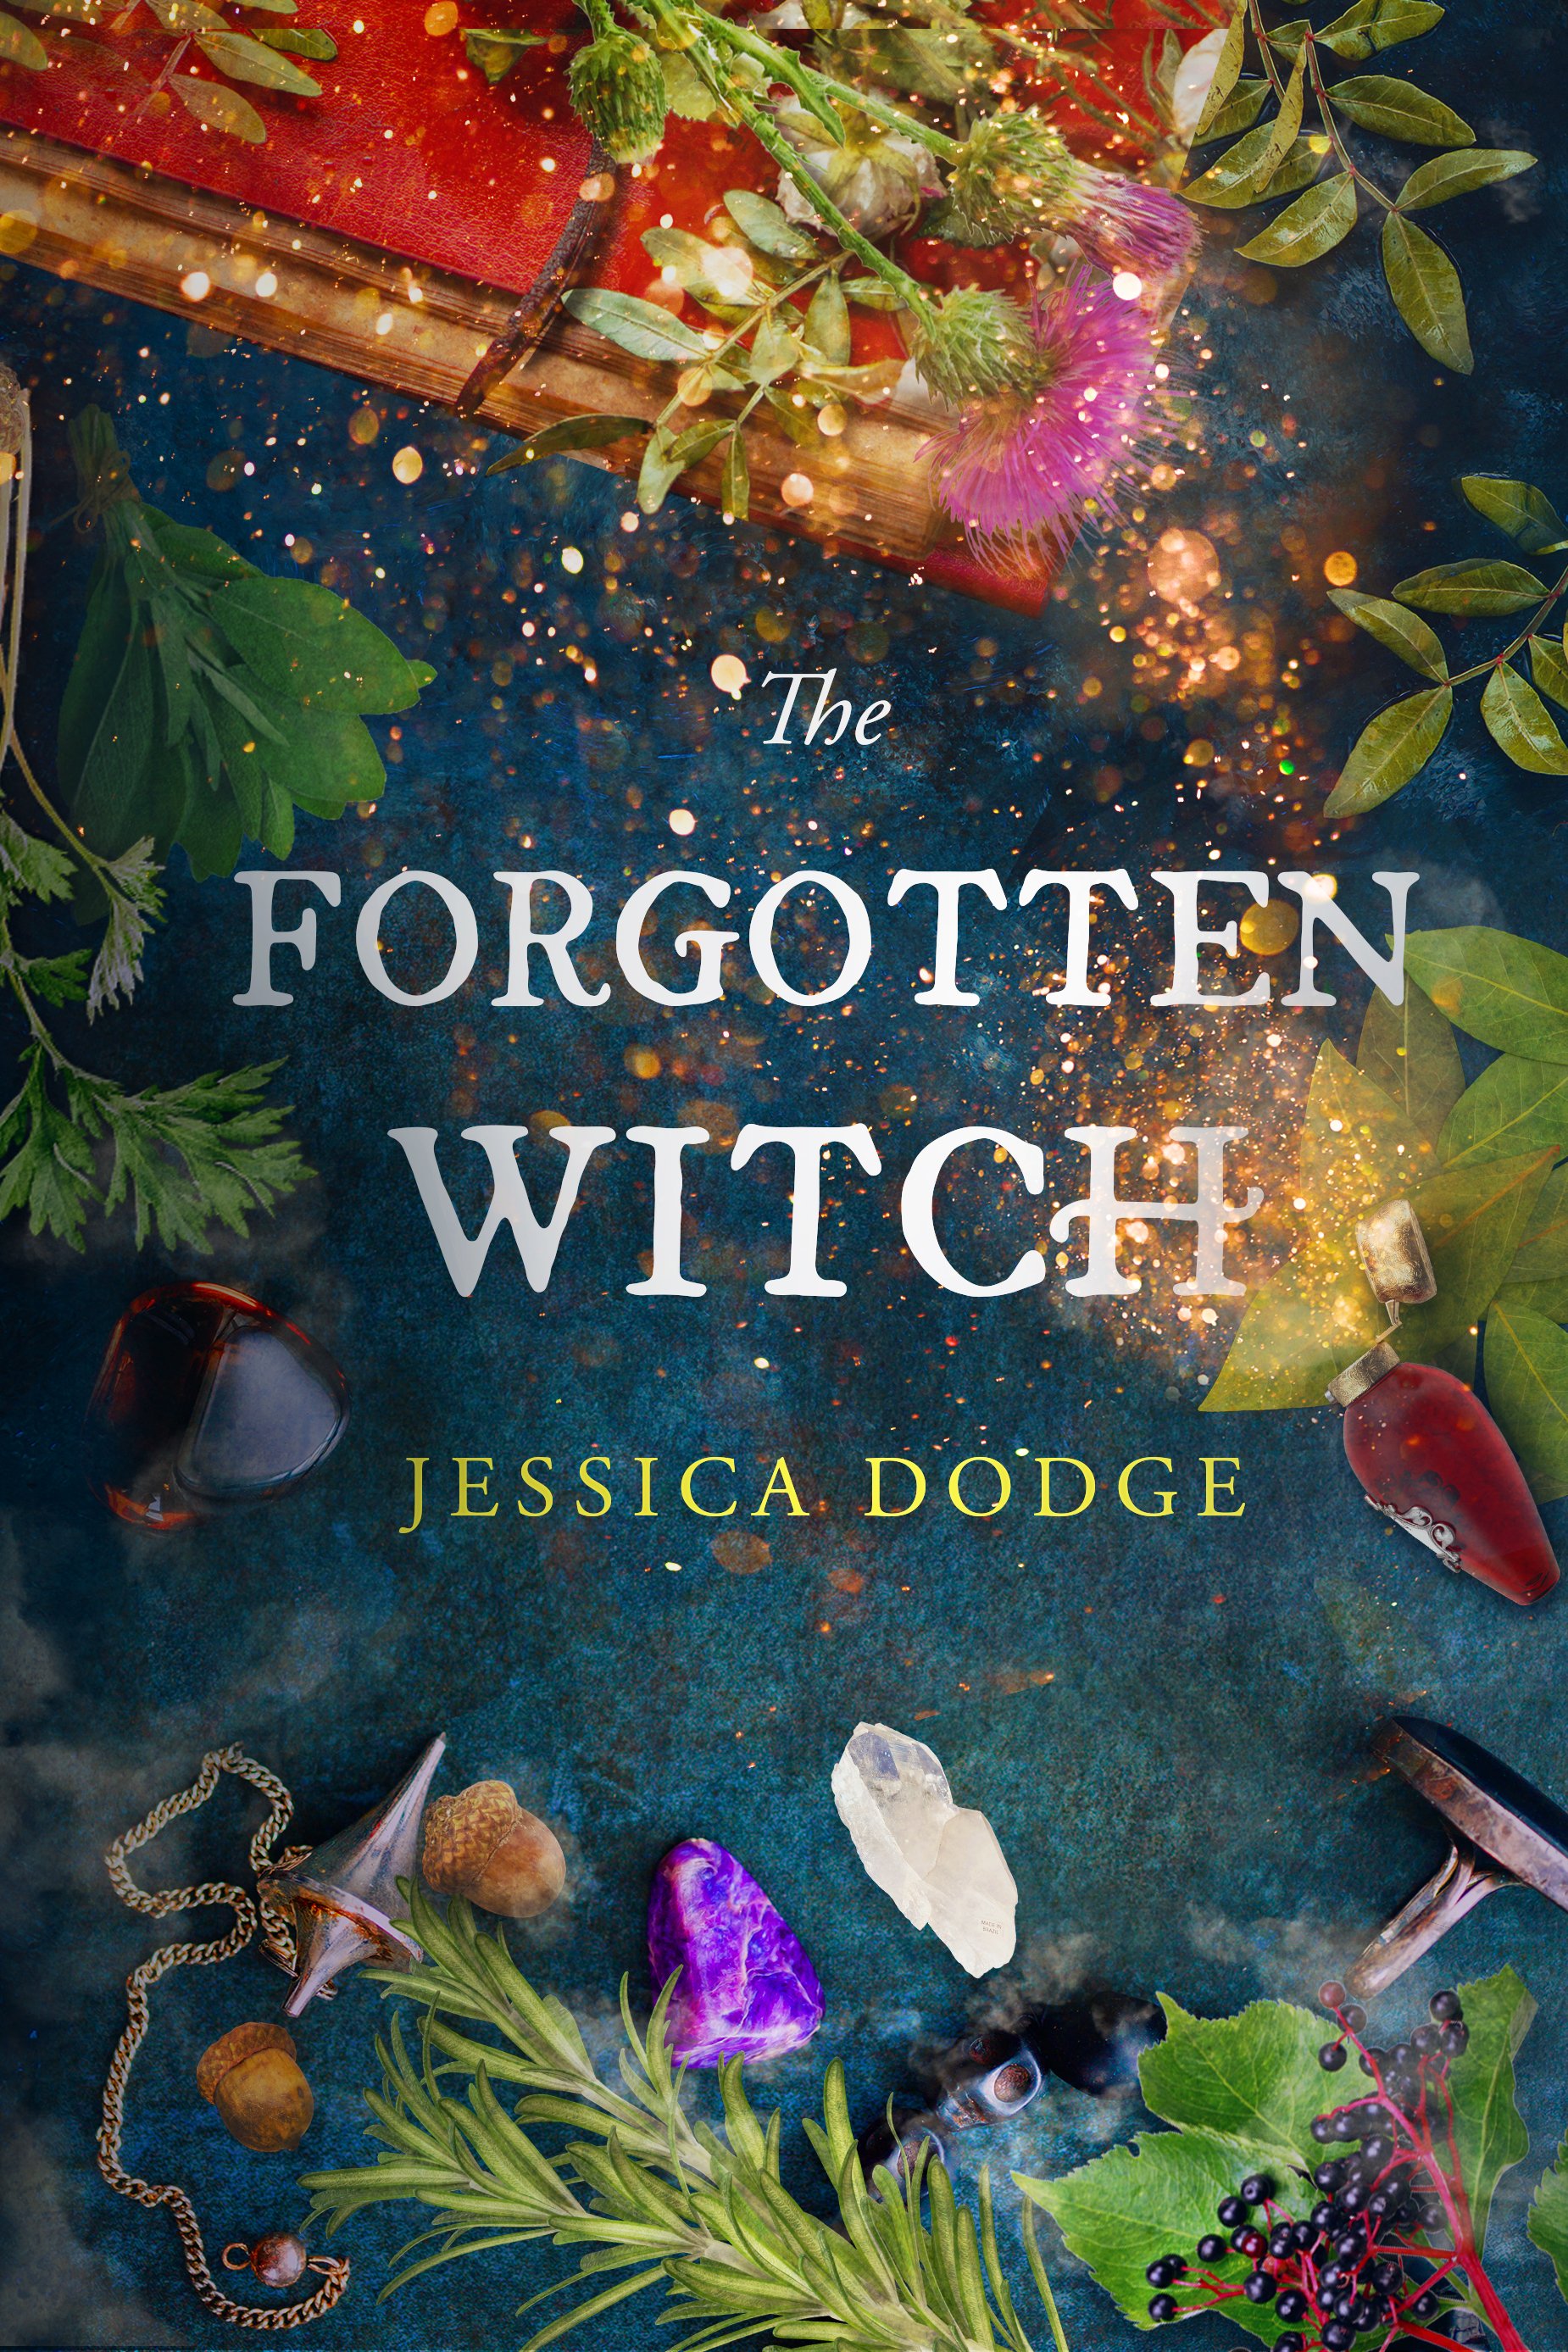 The Forgotten Witch - ebook cover.jpg